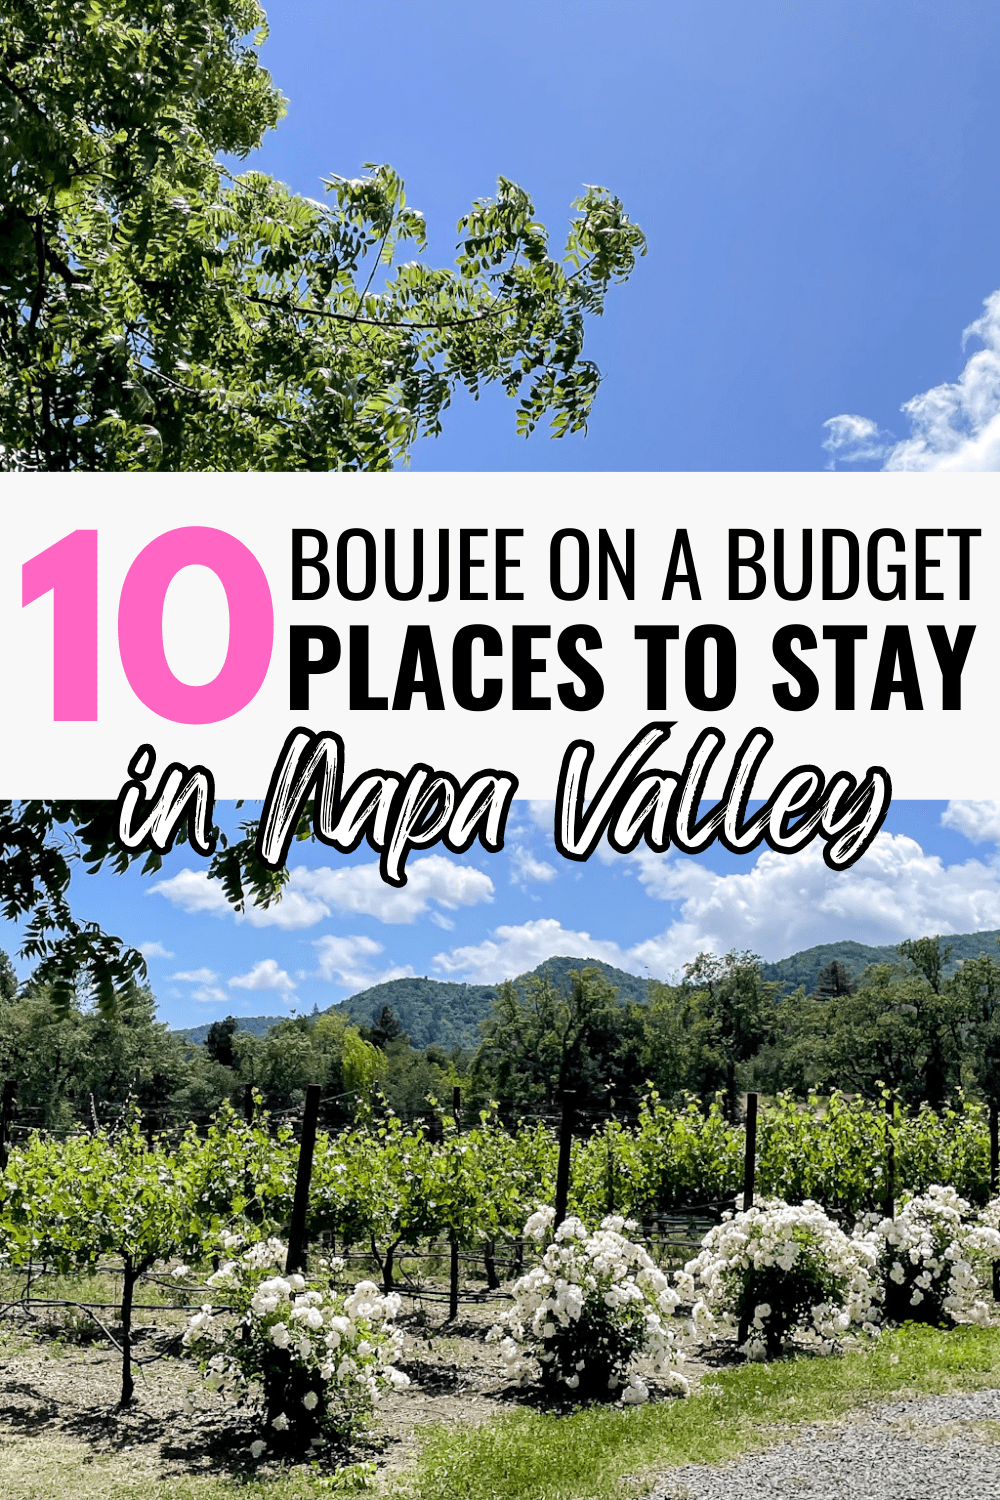 10 Boujee on a Budget Places to Stay in Napa Valley with vineyard scenery